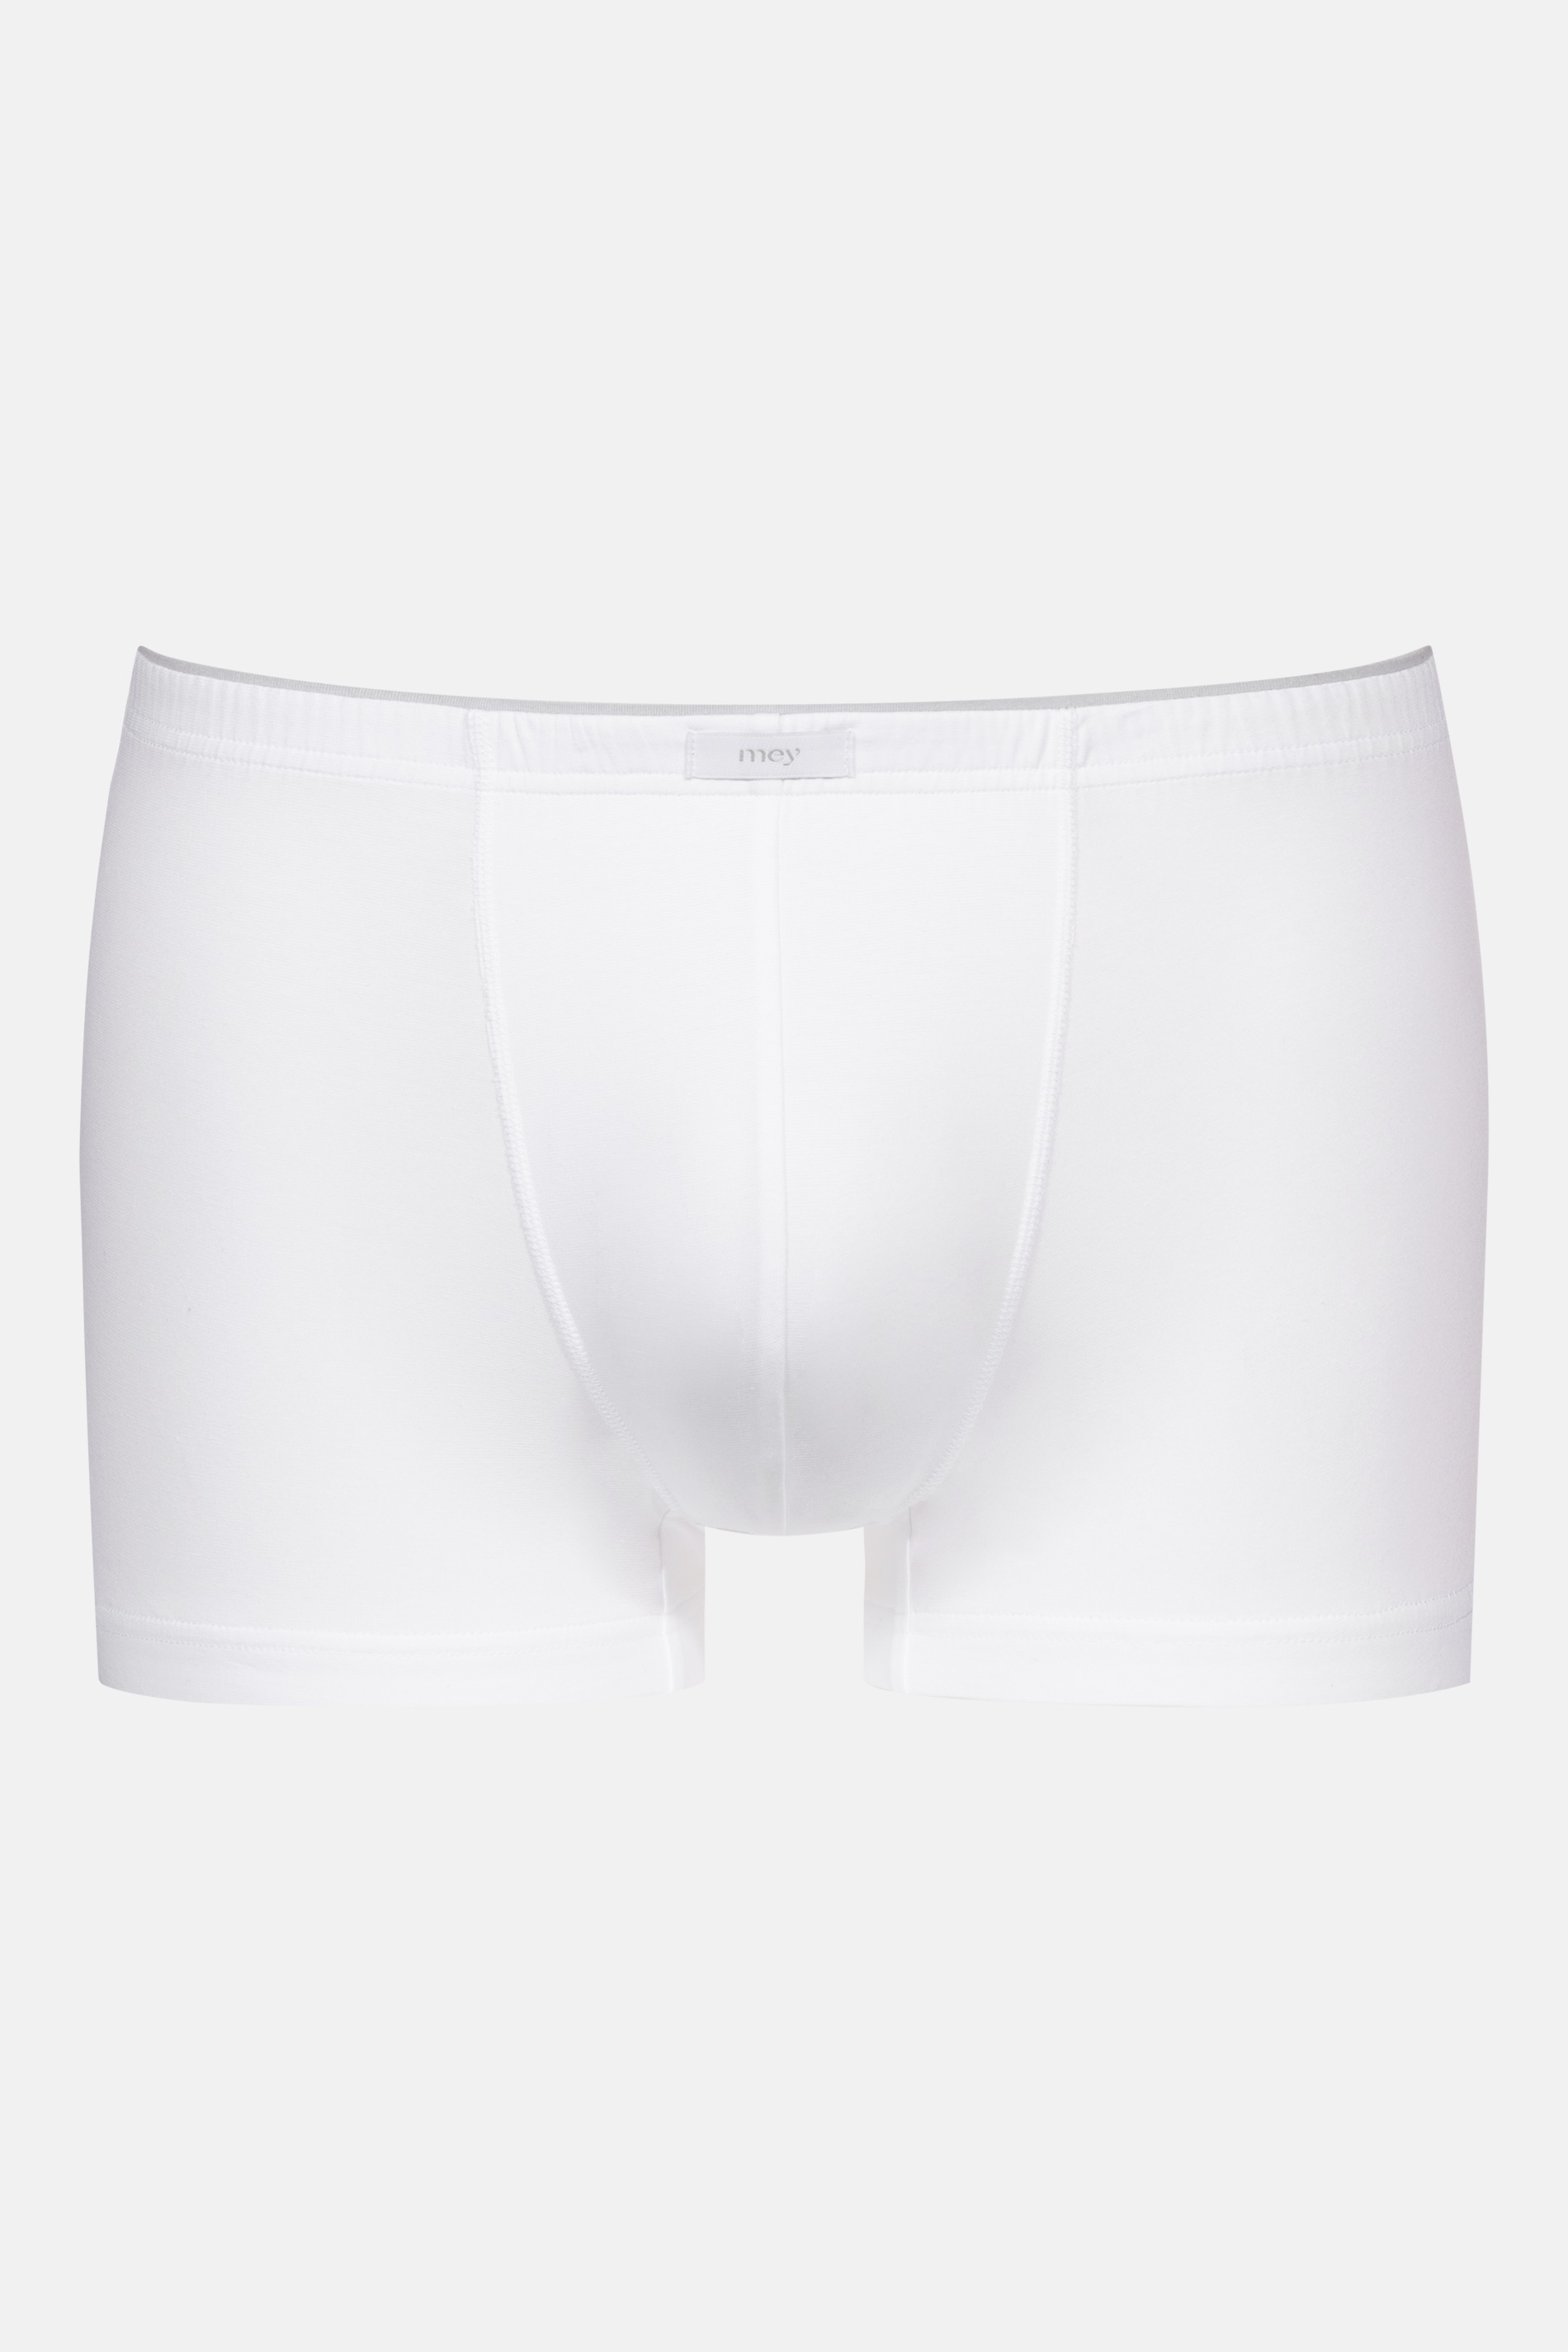 Shorty Wit Serie Dry Cotton Uitknippen | mey®